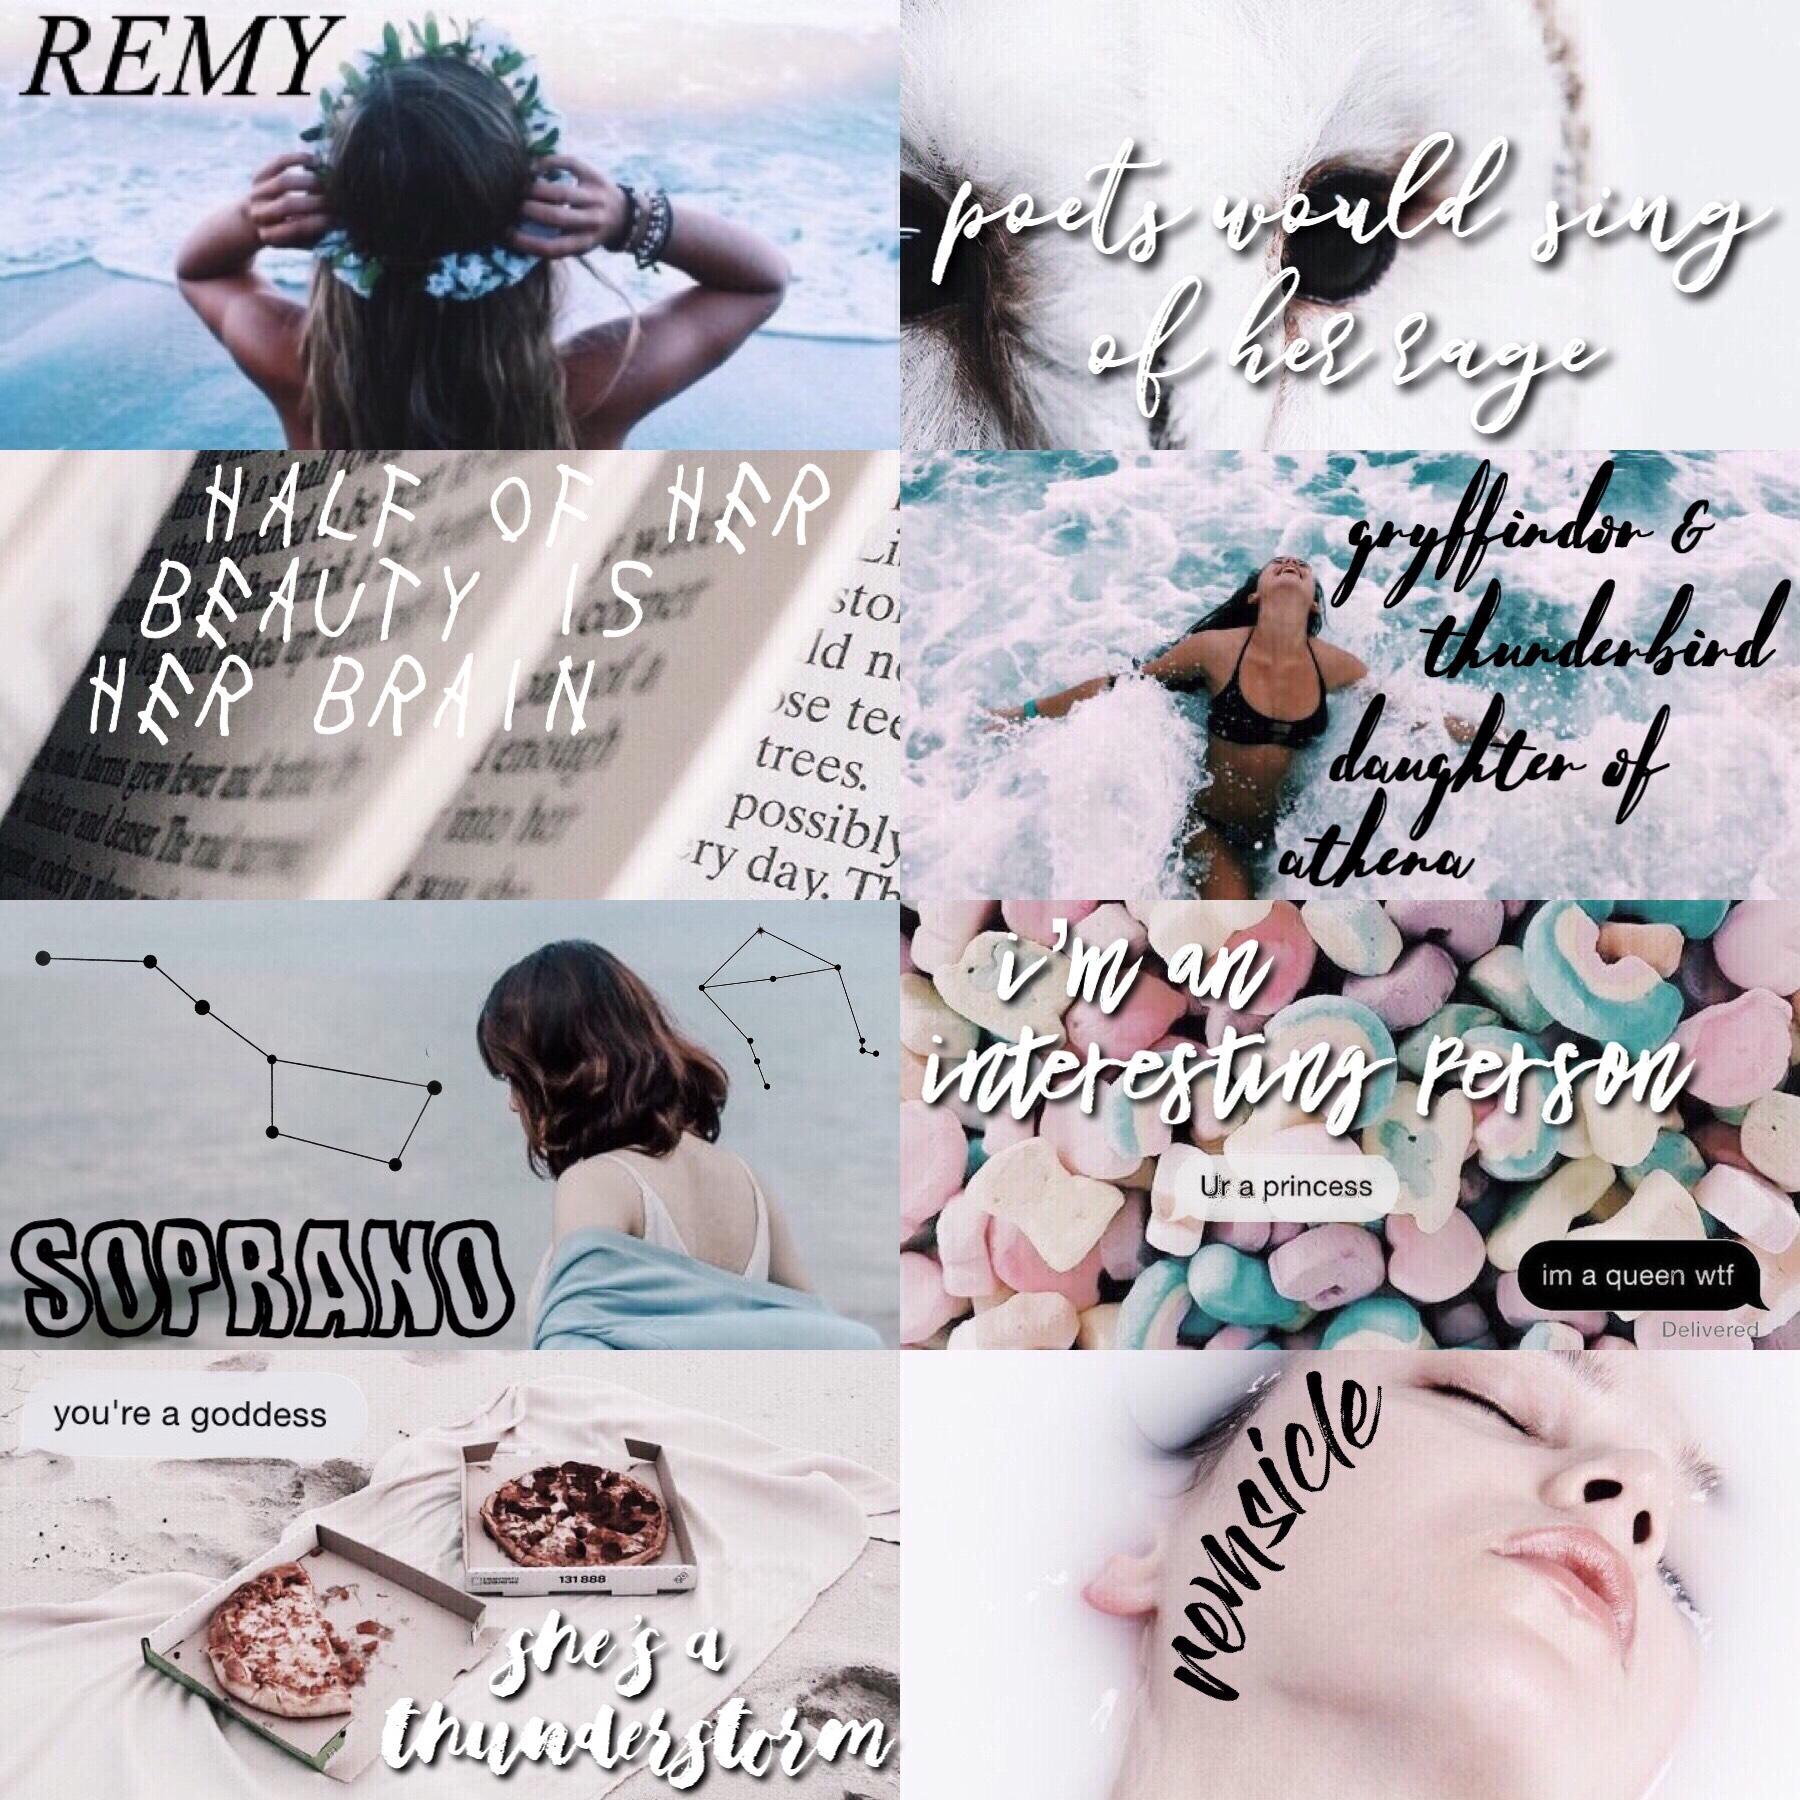 🌬 t a p 🌬

the text on some of the photos isn’t the best, but i liked how this turned out

qotd: should my next theme be singing? (par example, singers, fav songs, and lyrics)

🌬   🔭   🌧   📖   🌊

check remixes :)